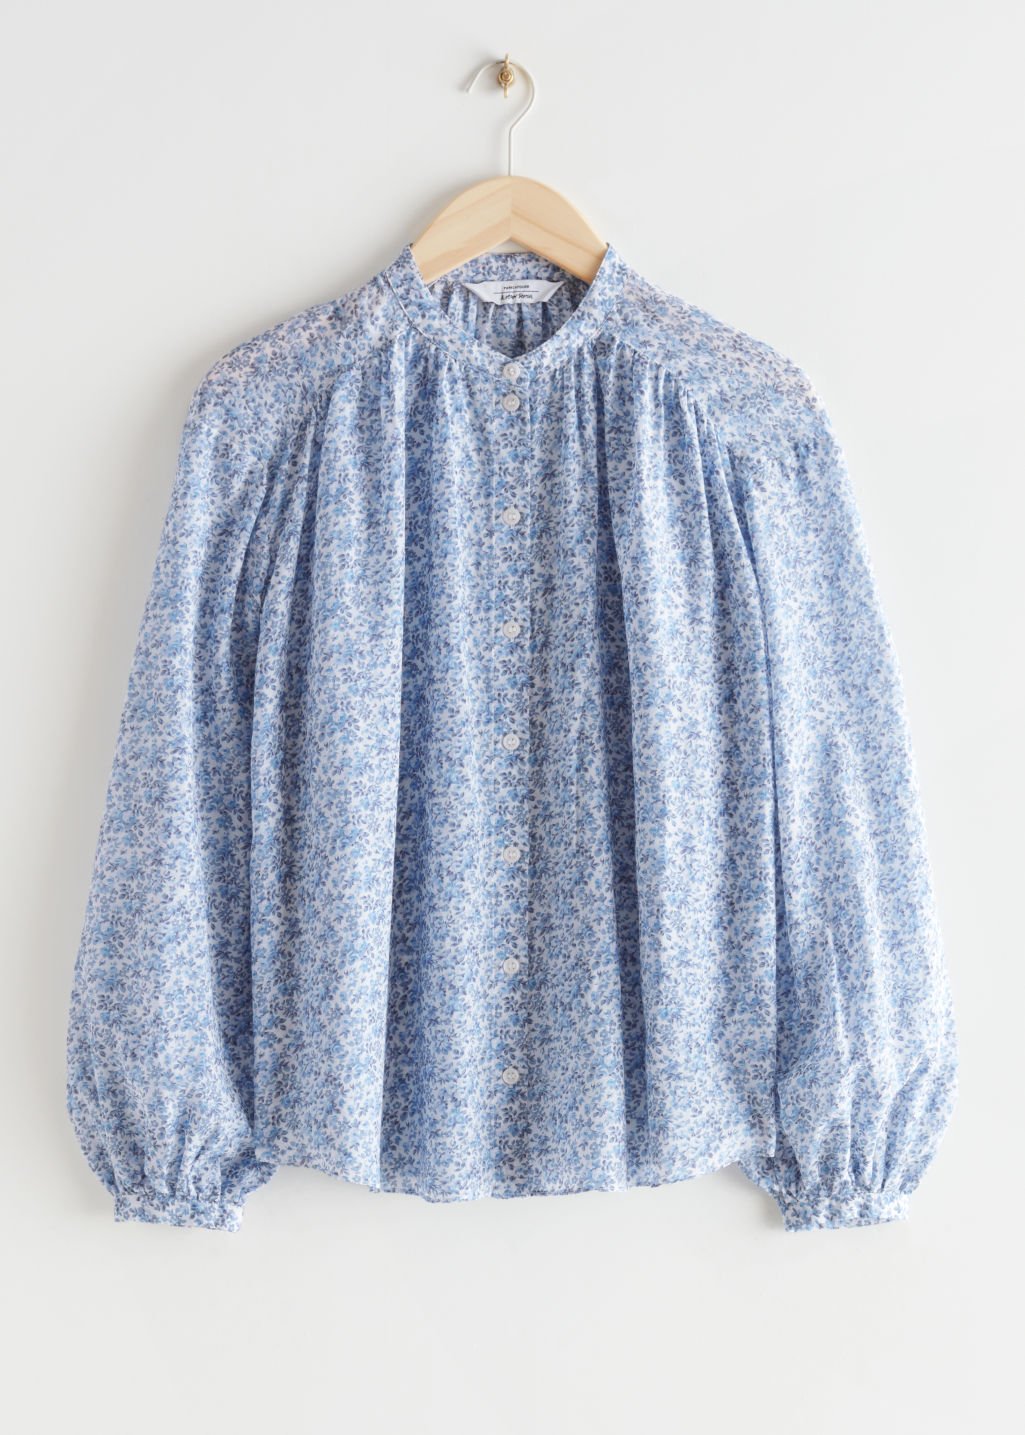 & Other Stories Printed Silk Blend Blouse in Blue — UFO No More